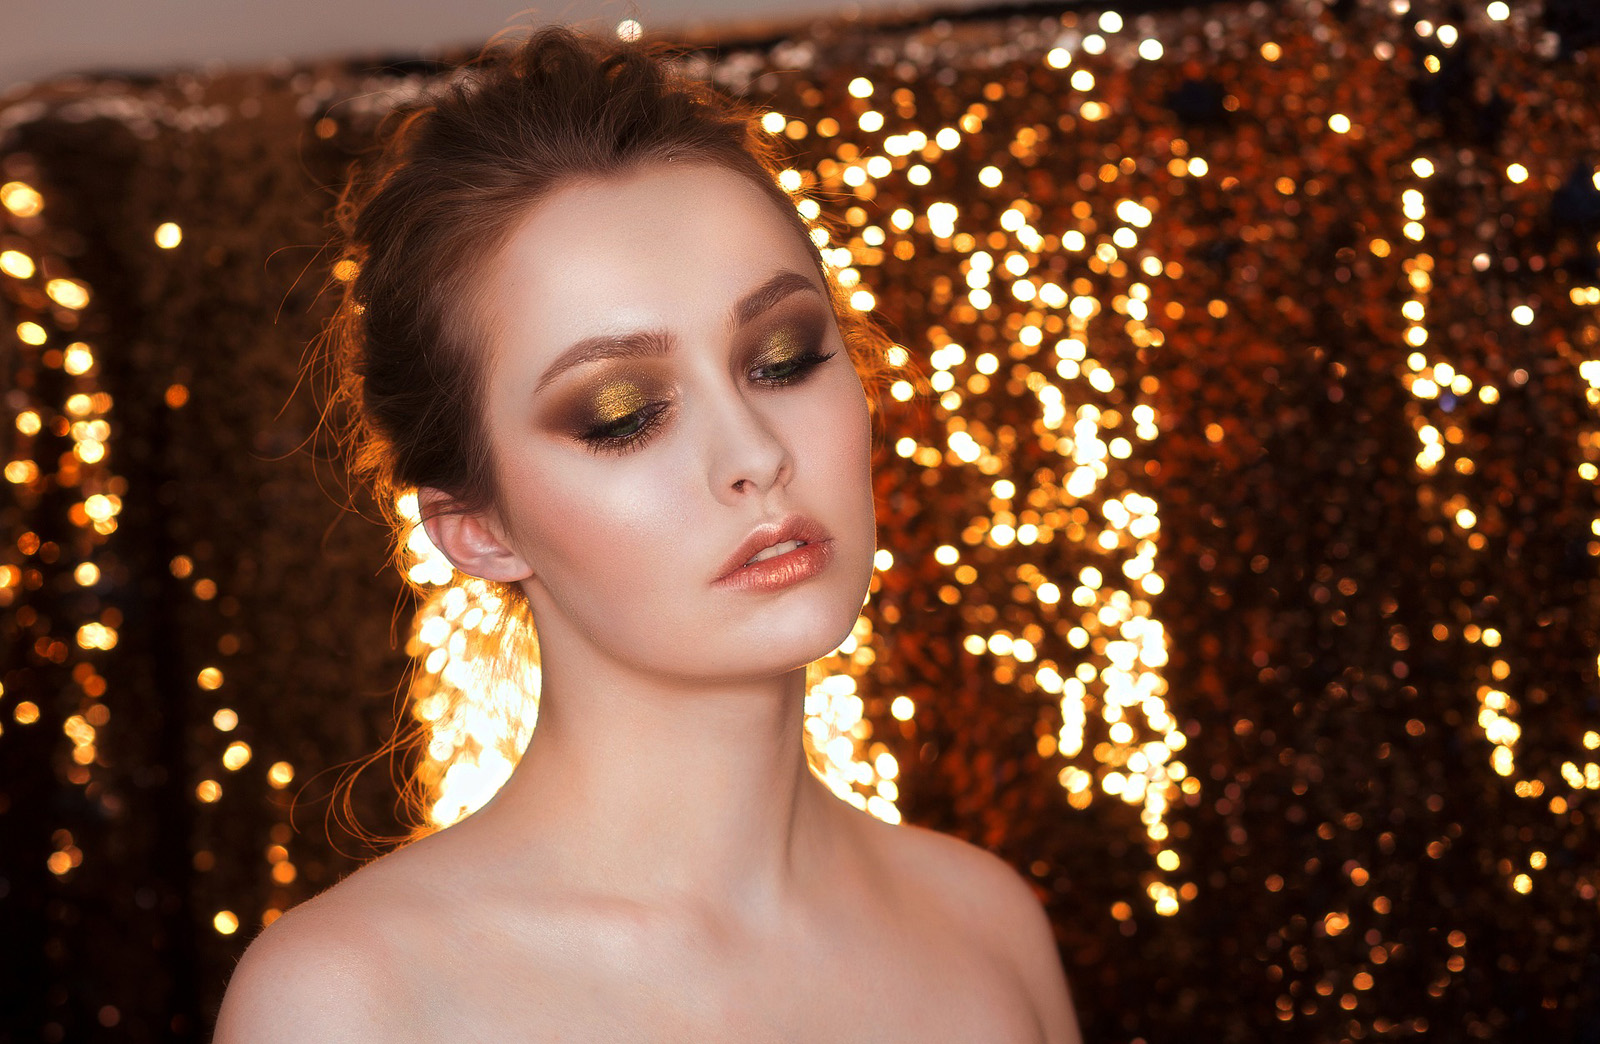 Beauty & hair guides: Christmas party makeup ideas | The House of Klamer